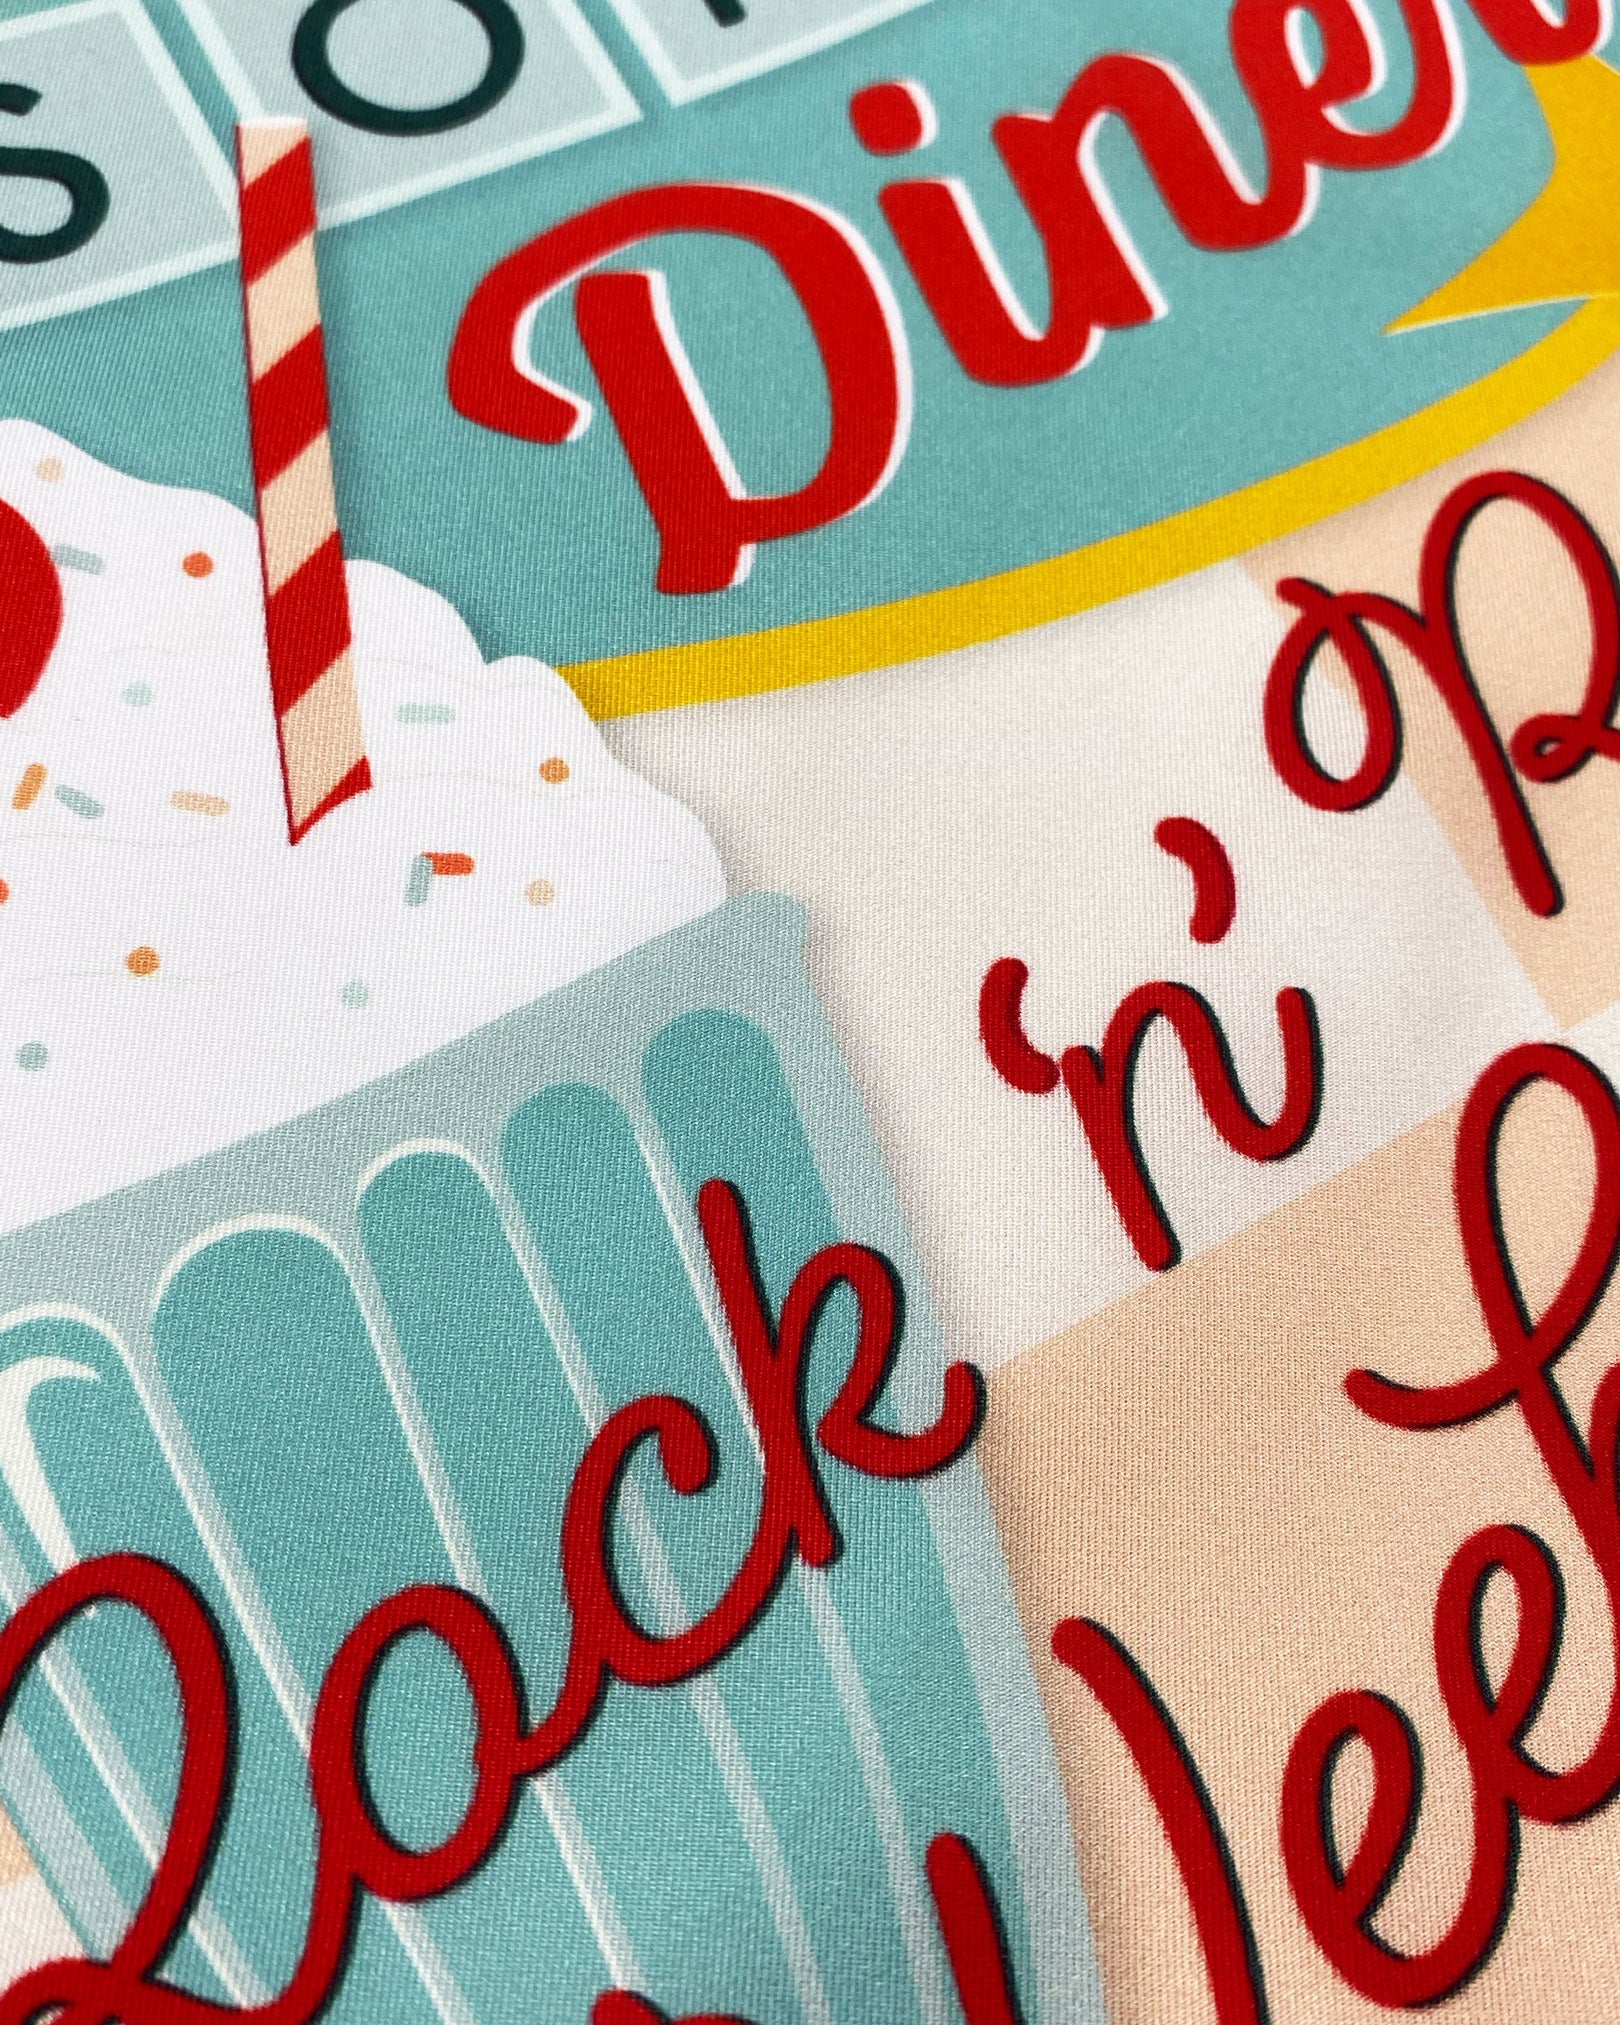 A ruffled close-up of the 'Milkshake' on chalk silk pocket square, presenting a closer look at a portion of the diner signage design.